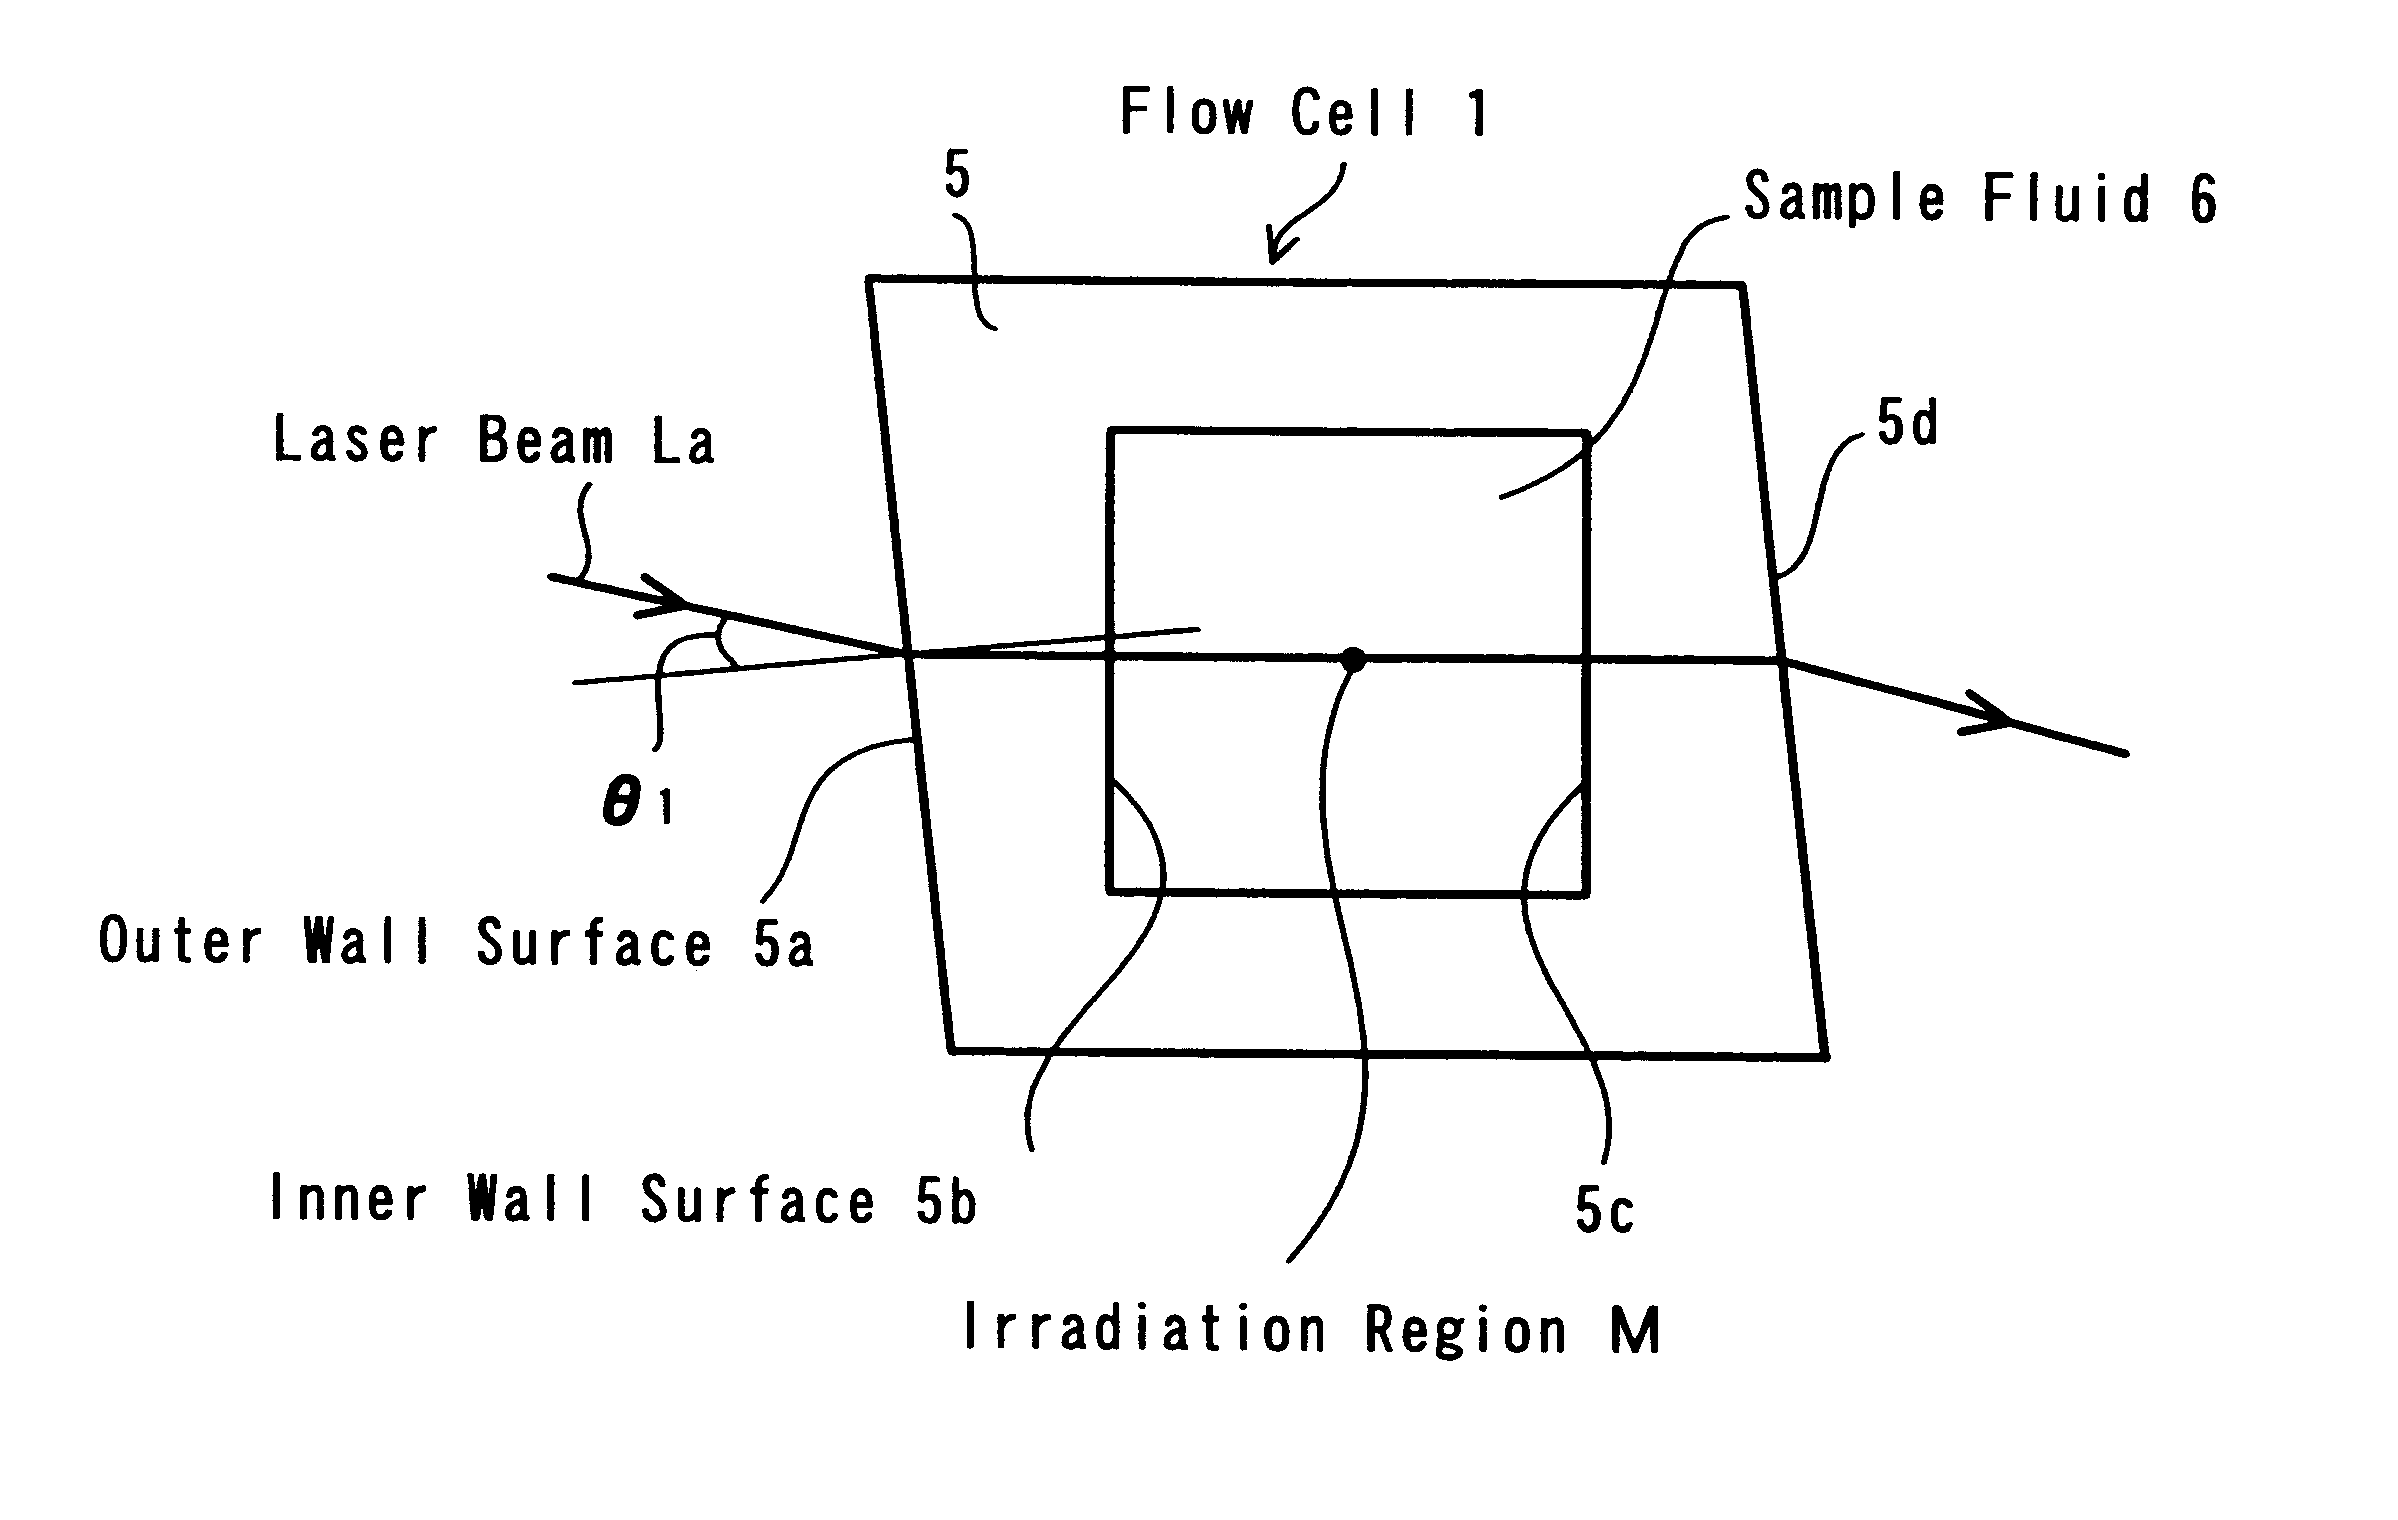 Particle measurement apparatus flow cell useful for sample fluids having different refractive indexes